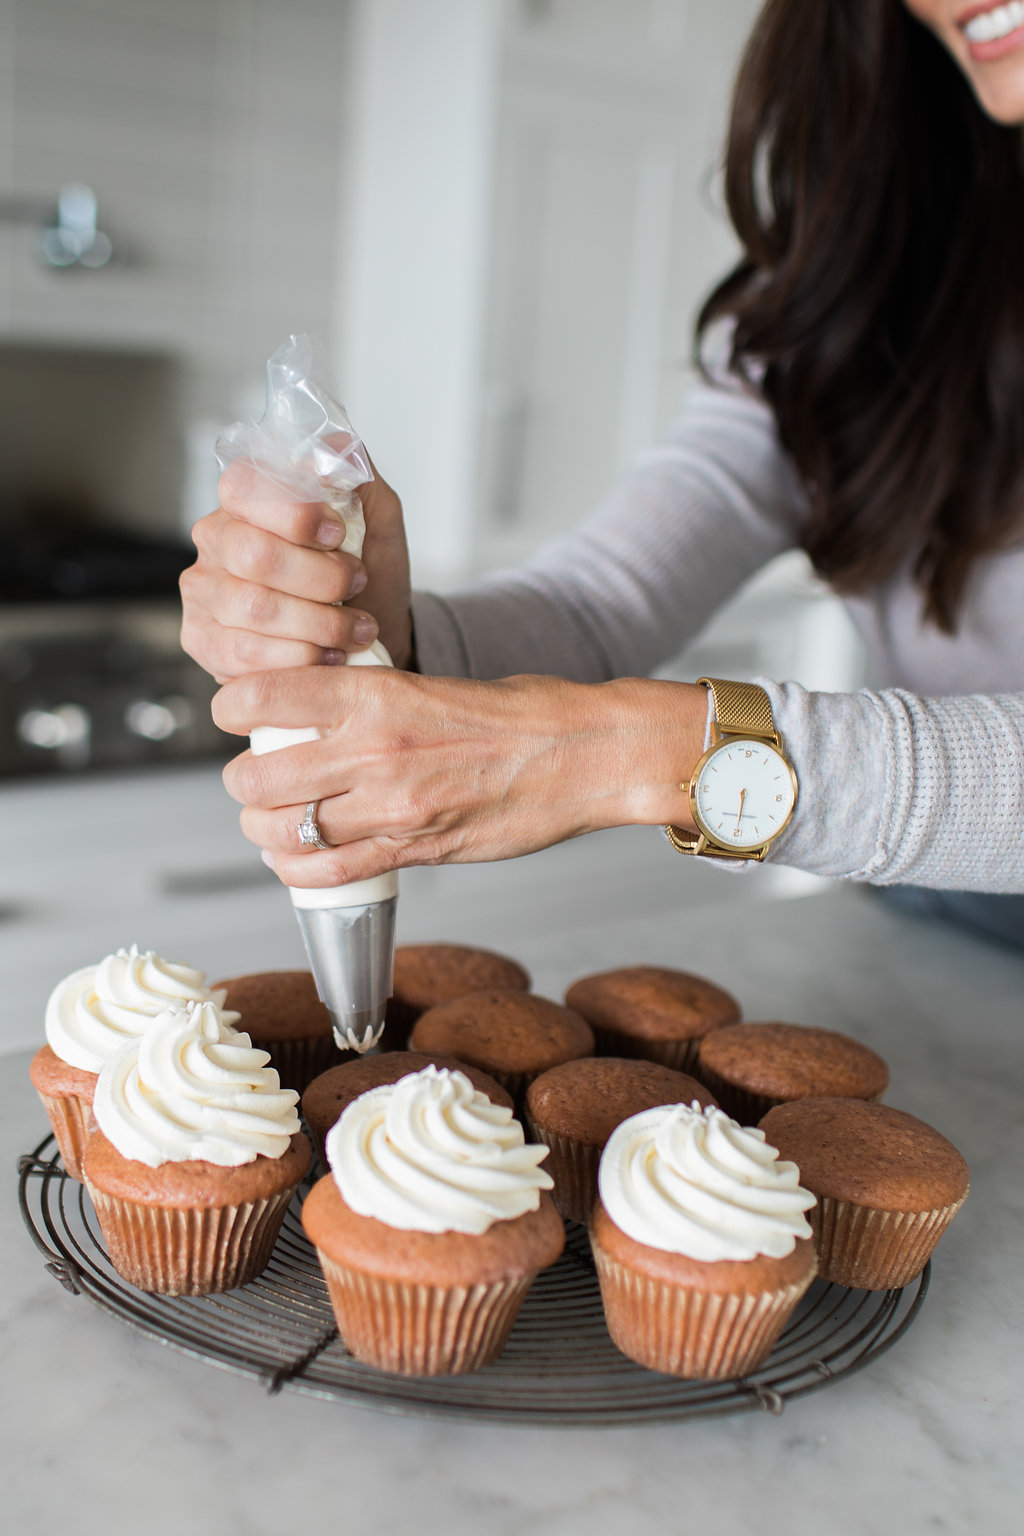 How to pipe whipped cream for cupcakes with fraichenutrition.com!